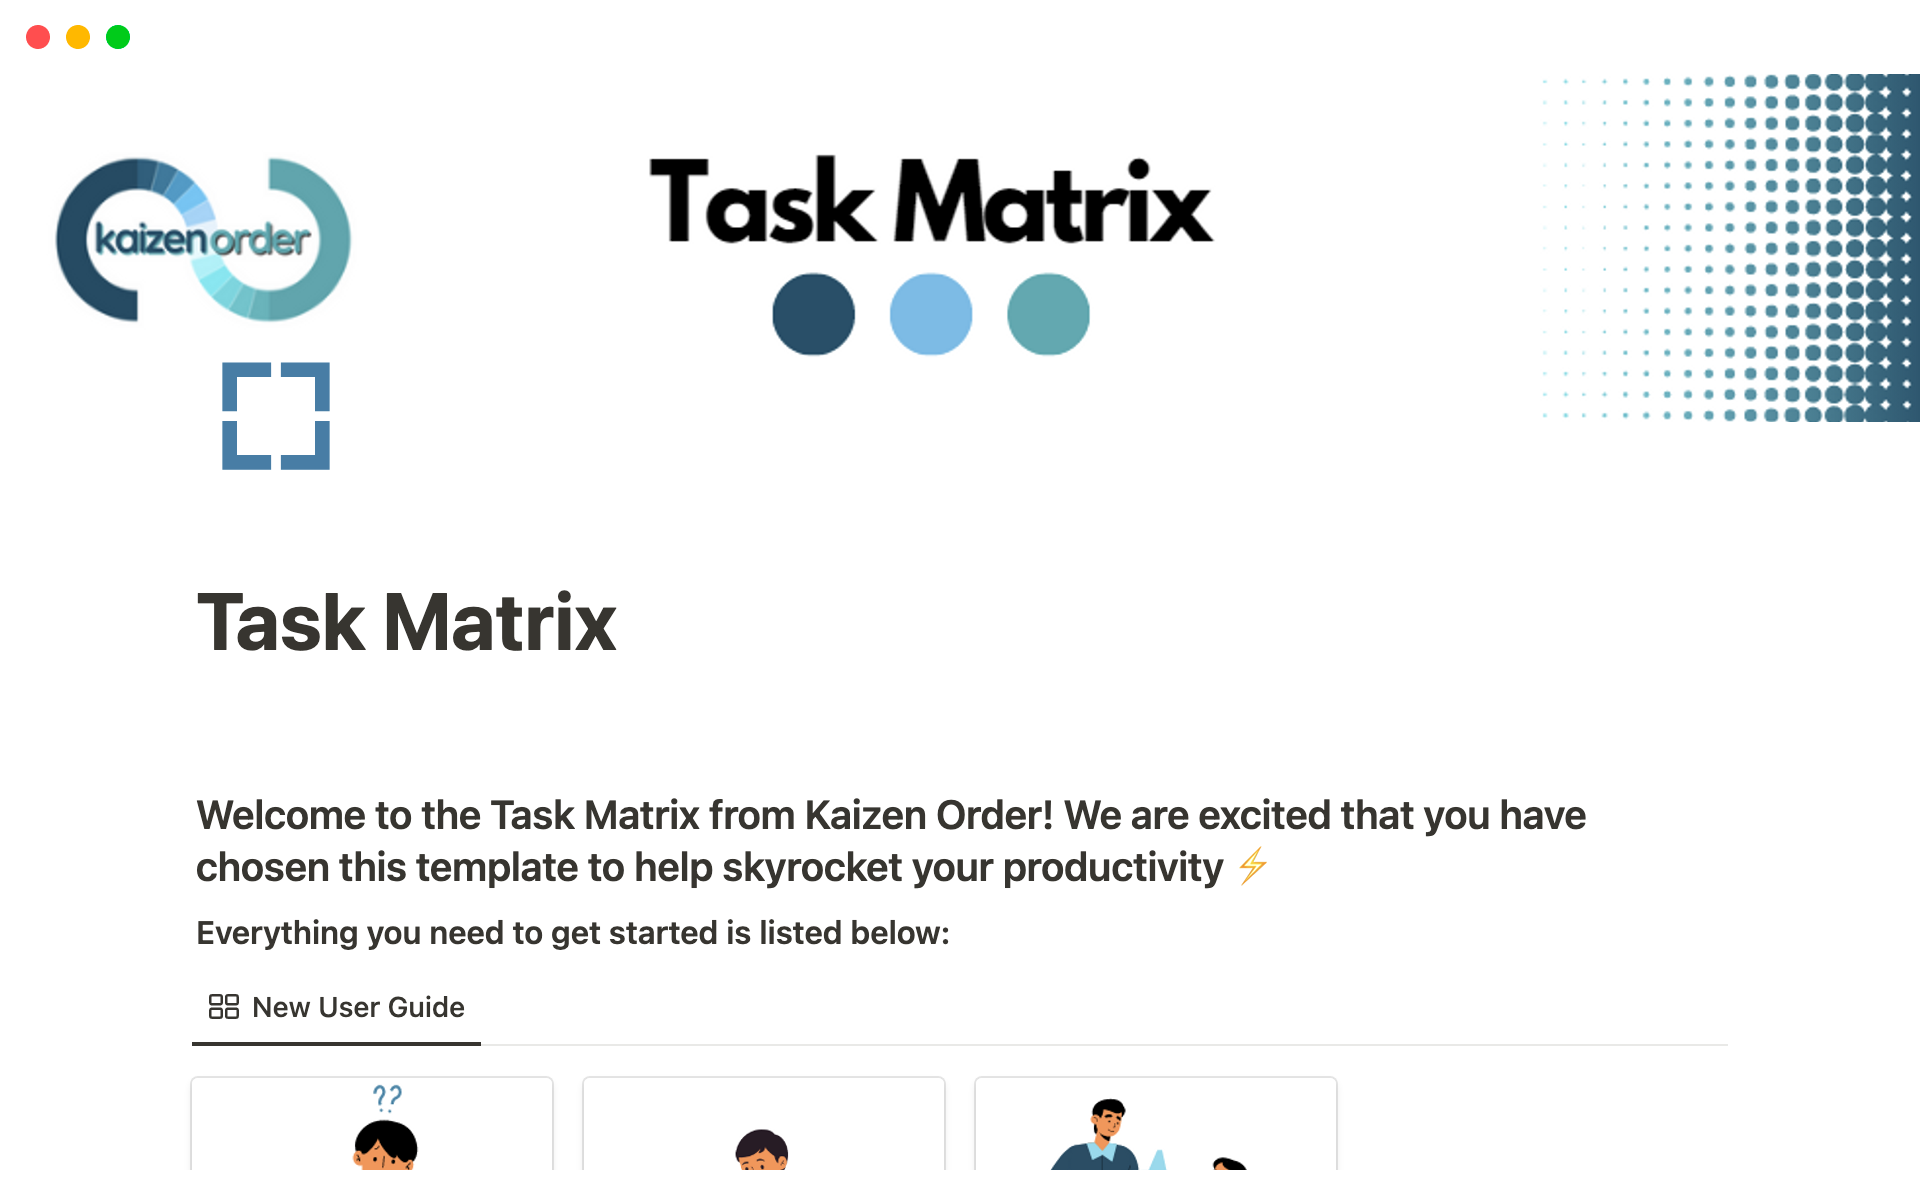 Developed by the Kaizen Order, the Task Matrix is a tailor-made tool designed to help you manage your tasks effectively and skyrocket your productivity.